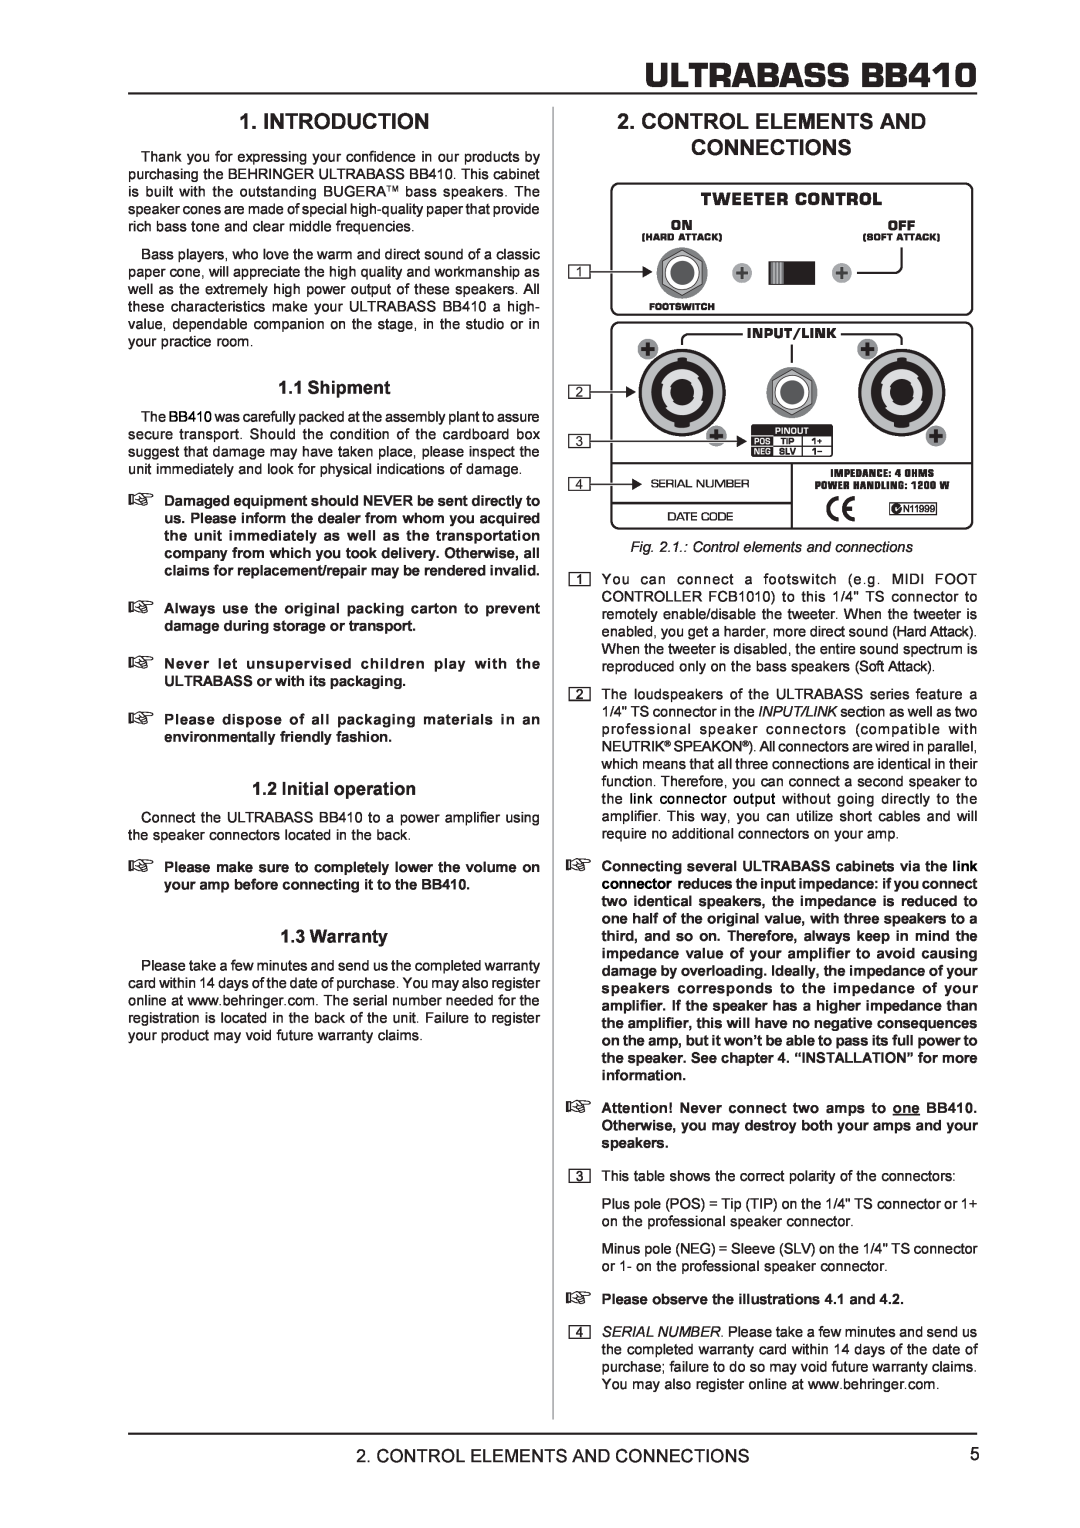 Behringer manual Introduction, Control Elements And Connections, ULTRABASS BB410, Shipment, Initial operation, Warranty 